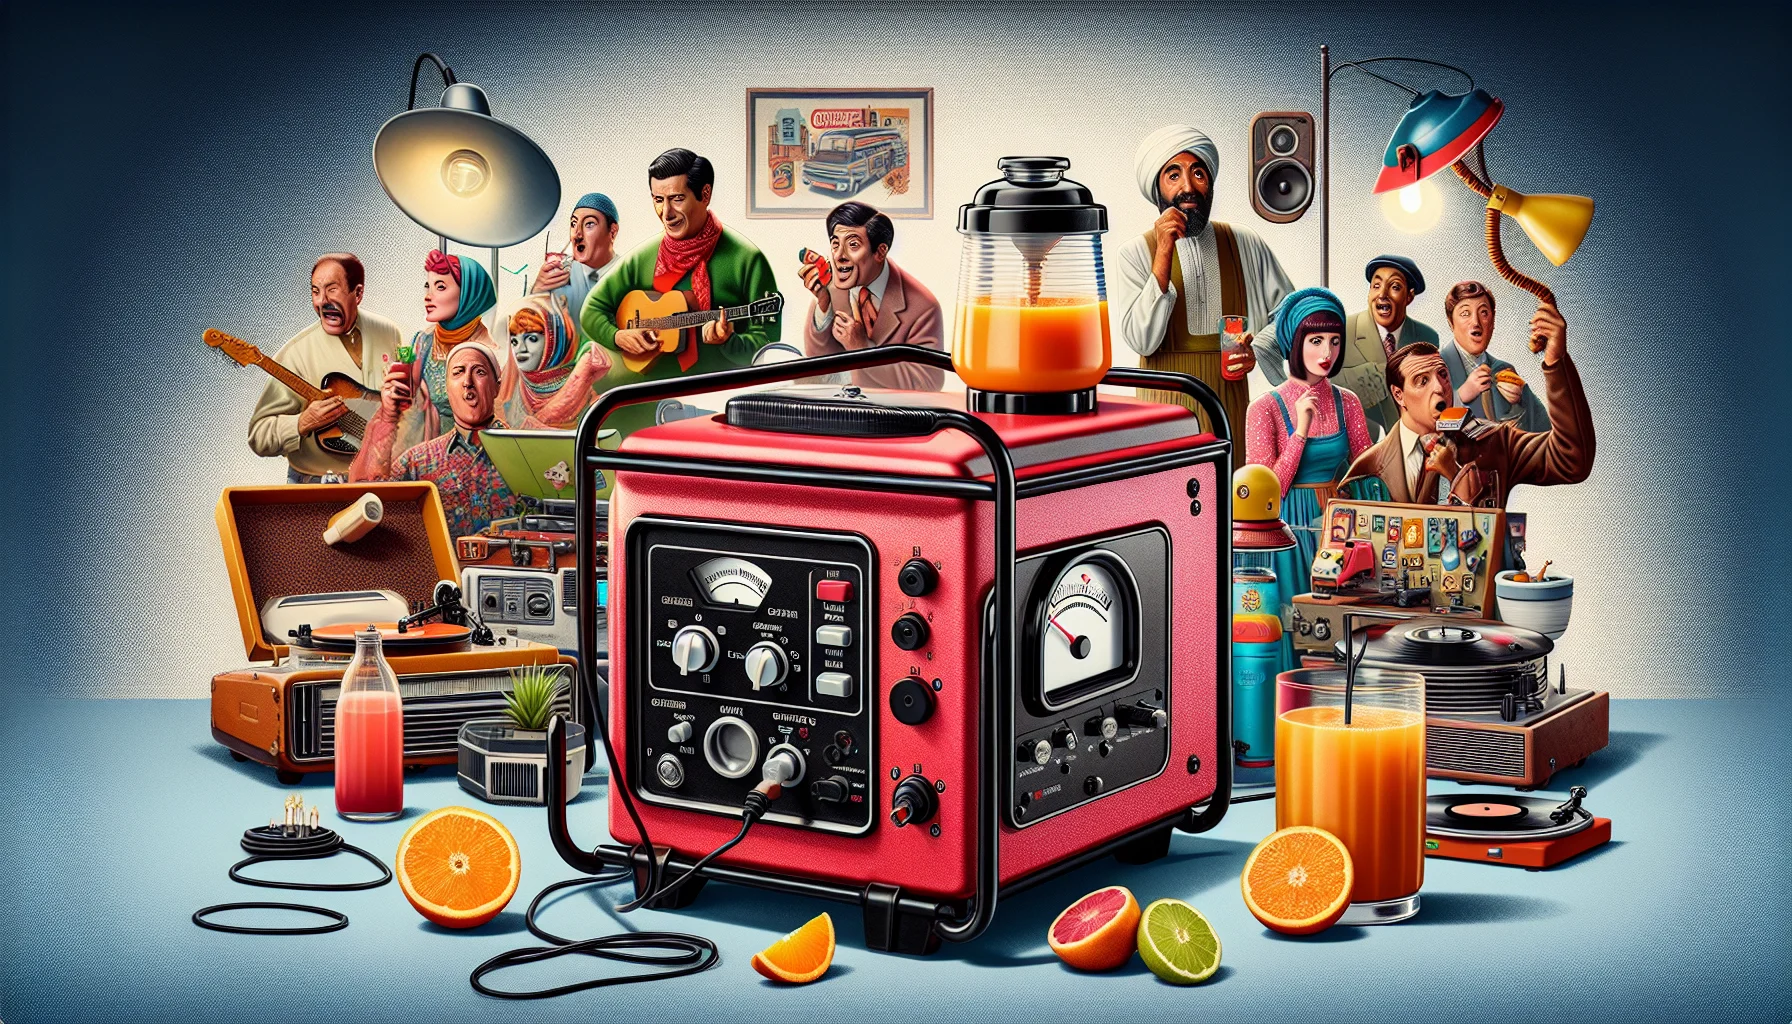 Create a playful and engaging image showing an amusing scenario centered around the use of a home generator. In the forefront, there is a generic home-style electricity generator. The generator has a vibrant red casing with black accents, and control buttons arranged neatly. It is busily powering up an assortment of eccentric devices like a brightly colored electric juicer squeezing fresh oranges, a classic vinyl record player spinning a favorite oldie, and a vintage lamp casting a warm, inviting glow. Nearby, there's a group of diverse people; a Caucasian man, a Middle-Eastern woman, and a South-Asian teenager, each looking at the generator with amusement and surprised expressions as they realize its potential. The backdrop should have a lighthearted tone suggesting the fun aspect of producing your own electricity.